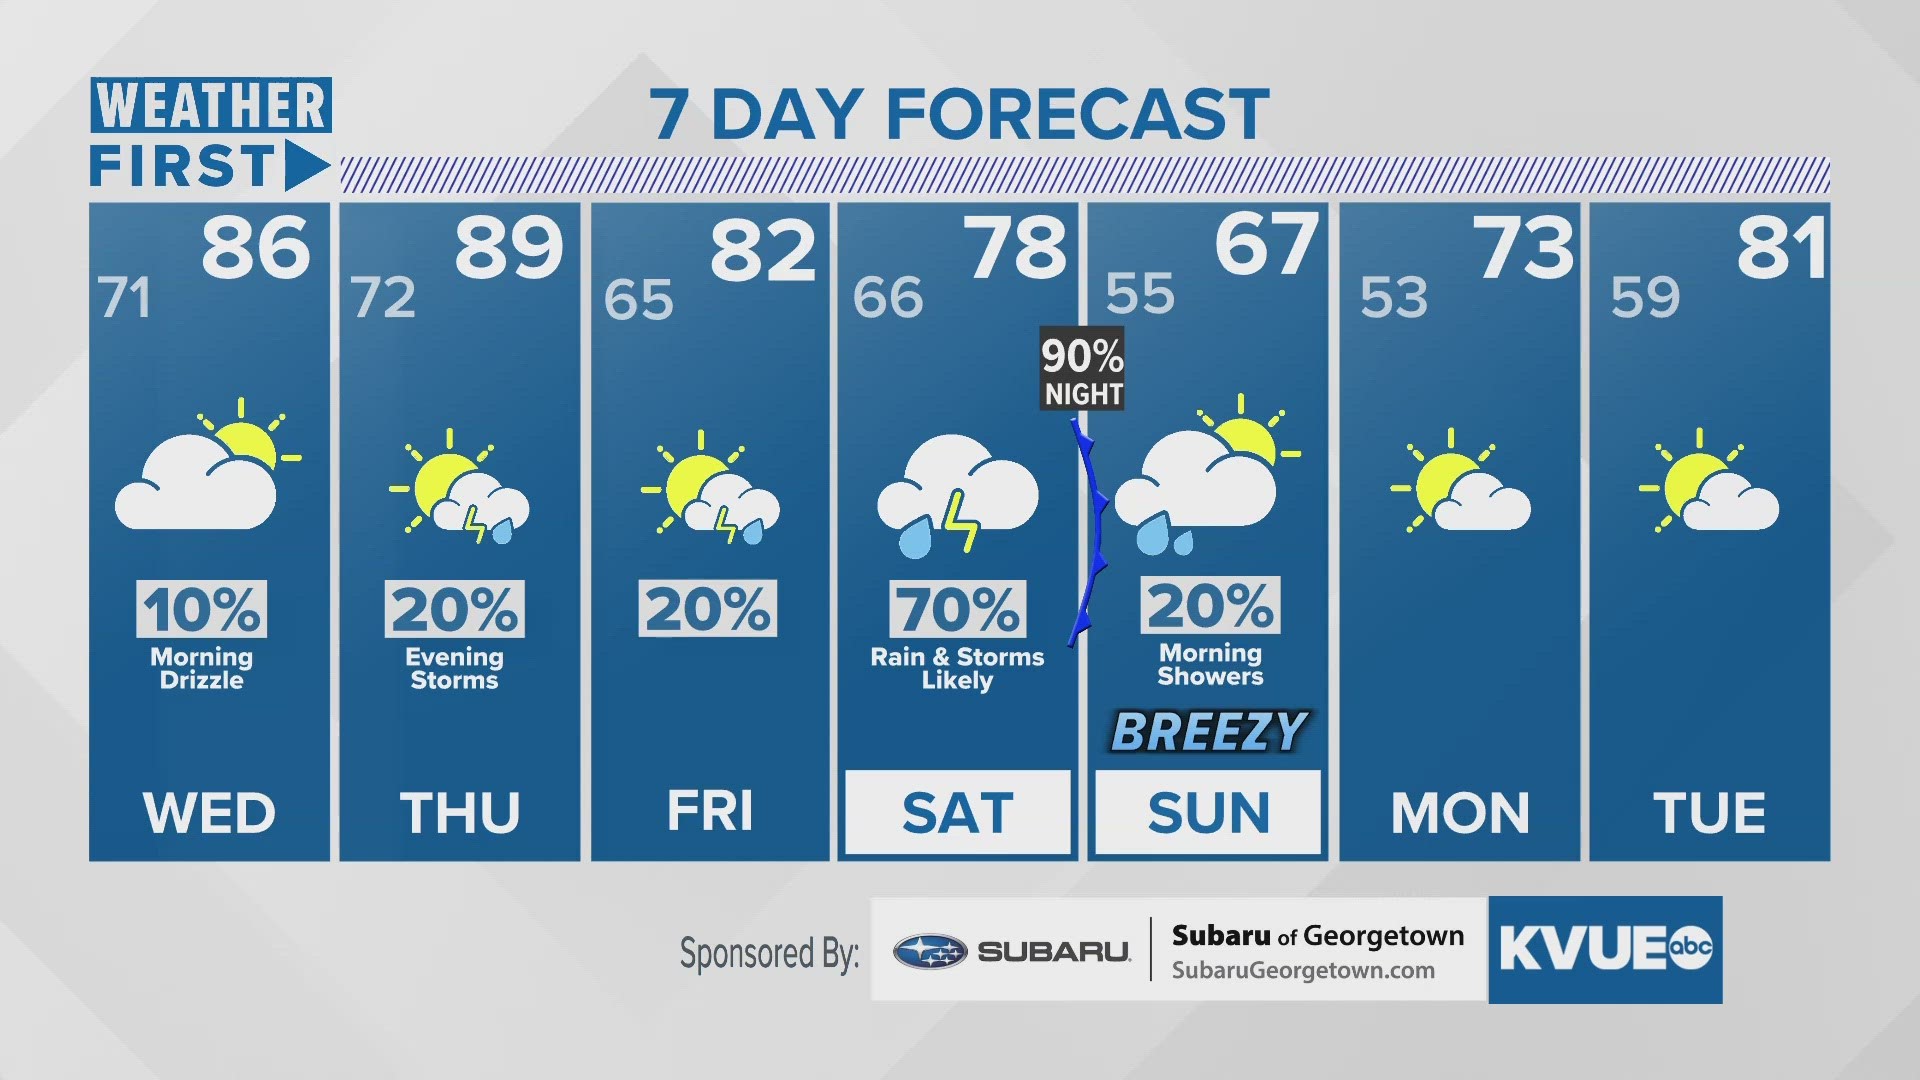 Rain and storms likely this weekend.